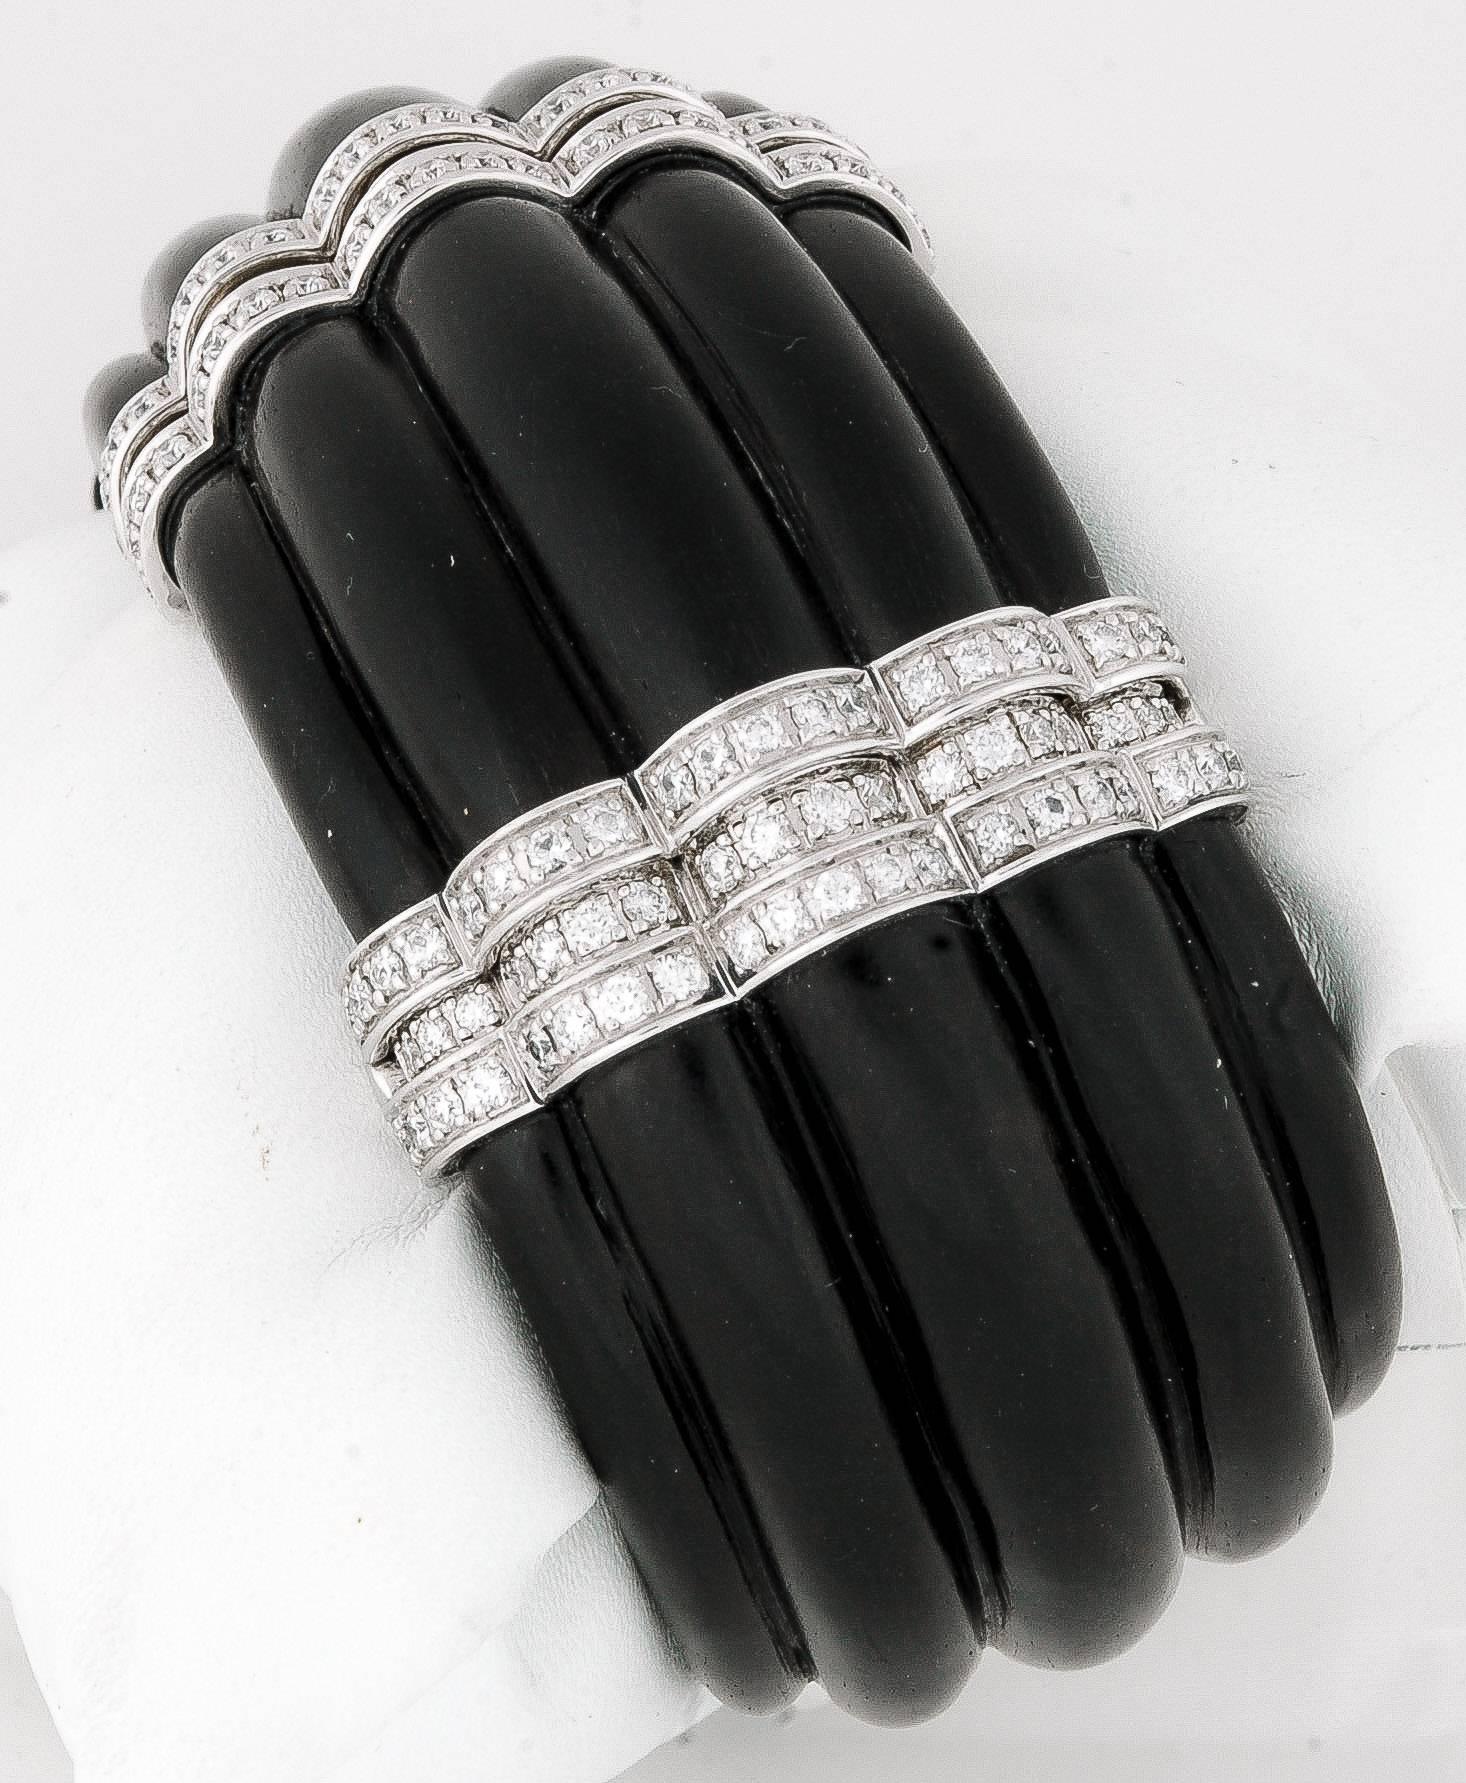 18kt white gold and stunning carved ebony are embellished with 165 round brilliant cut diamonds weighing a total of 4.02 carats, giving this cuff bracelet a hint of elegance and style.